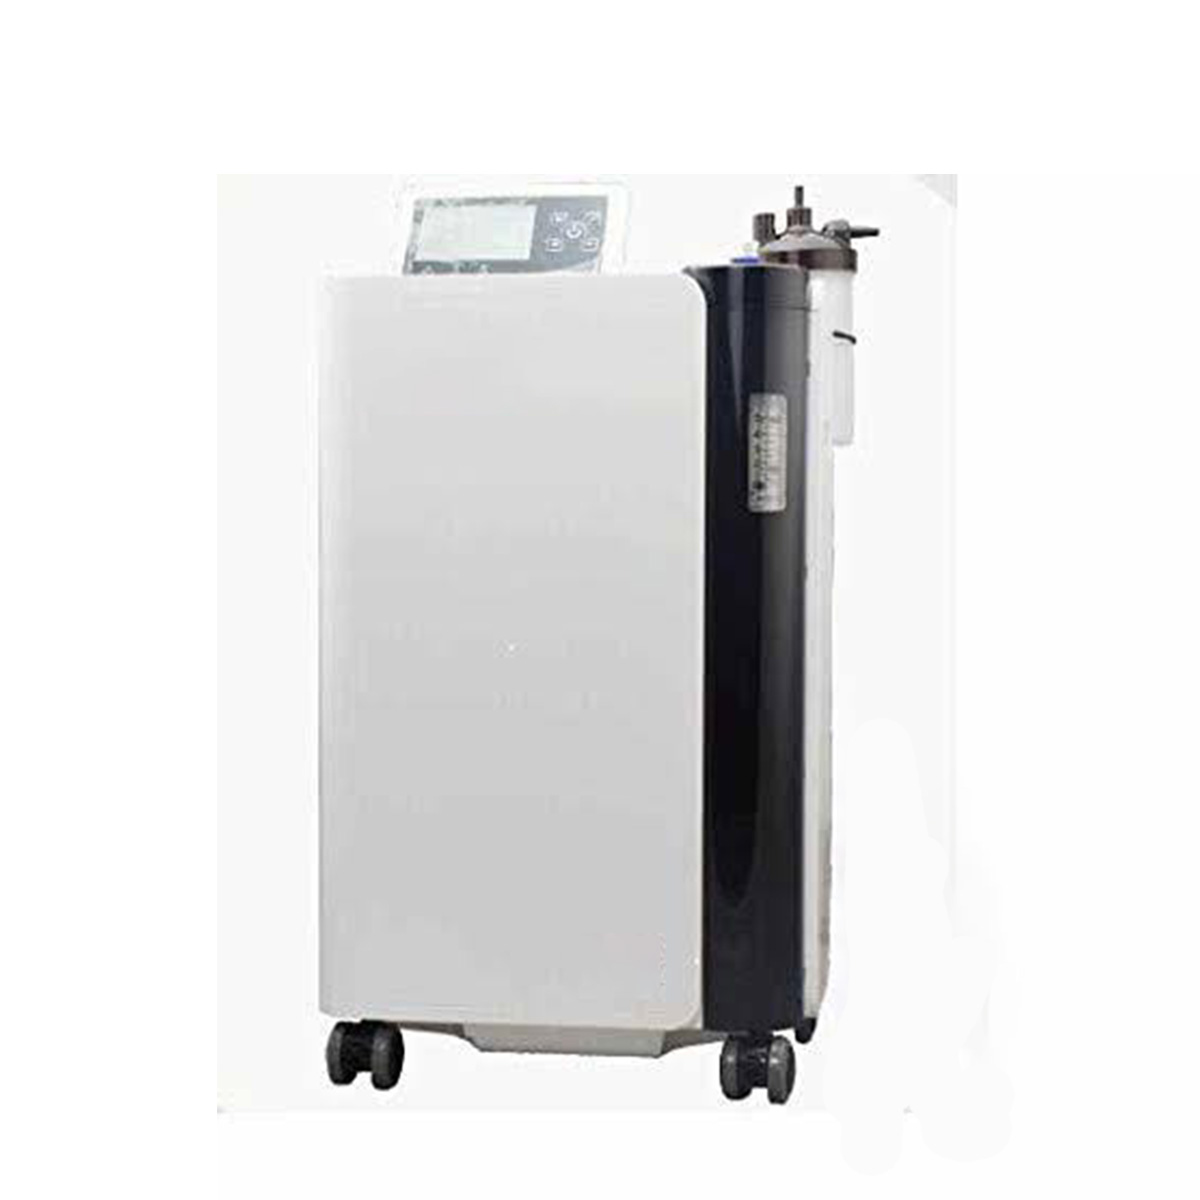 5 Lpm Oxymed Oxygen Concentrator On Sale Suppliers, Service Provider in Dilshad garden